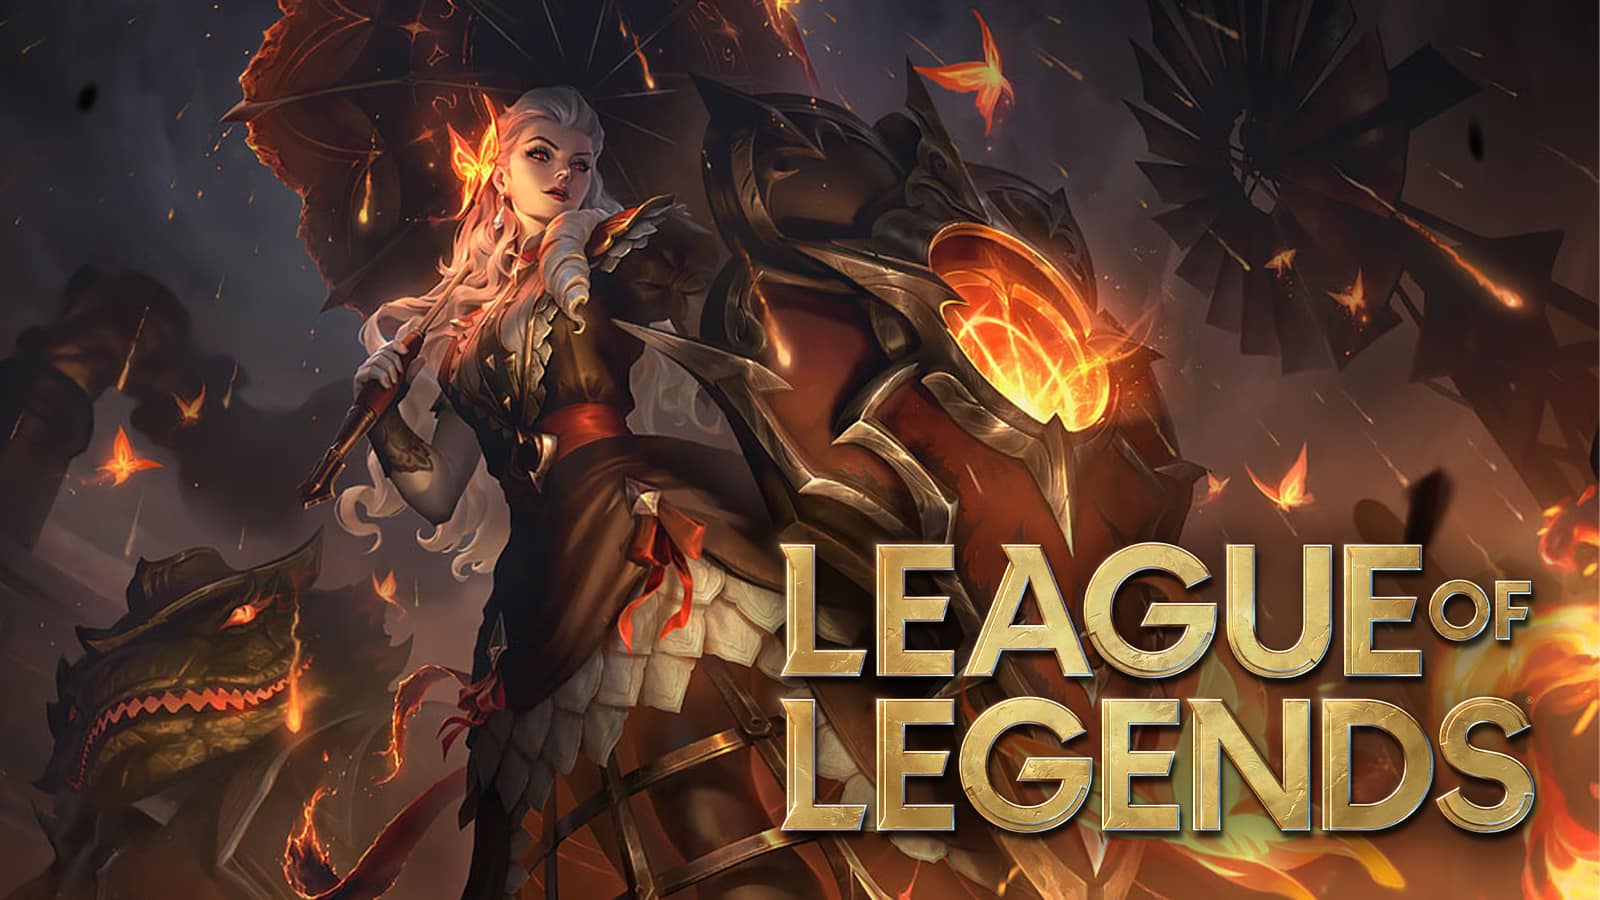 High Noon Leona in League of Legends